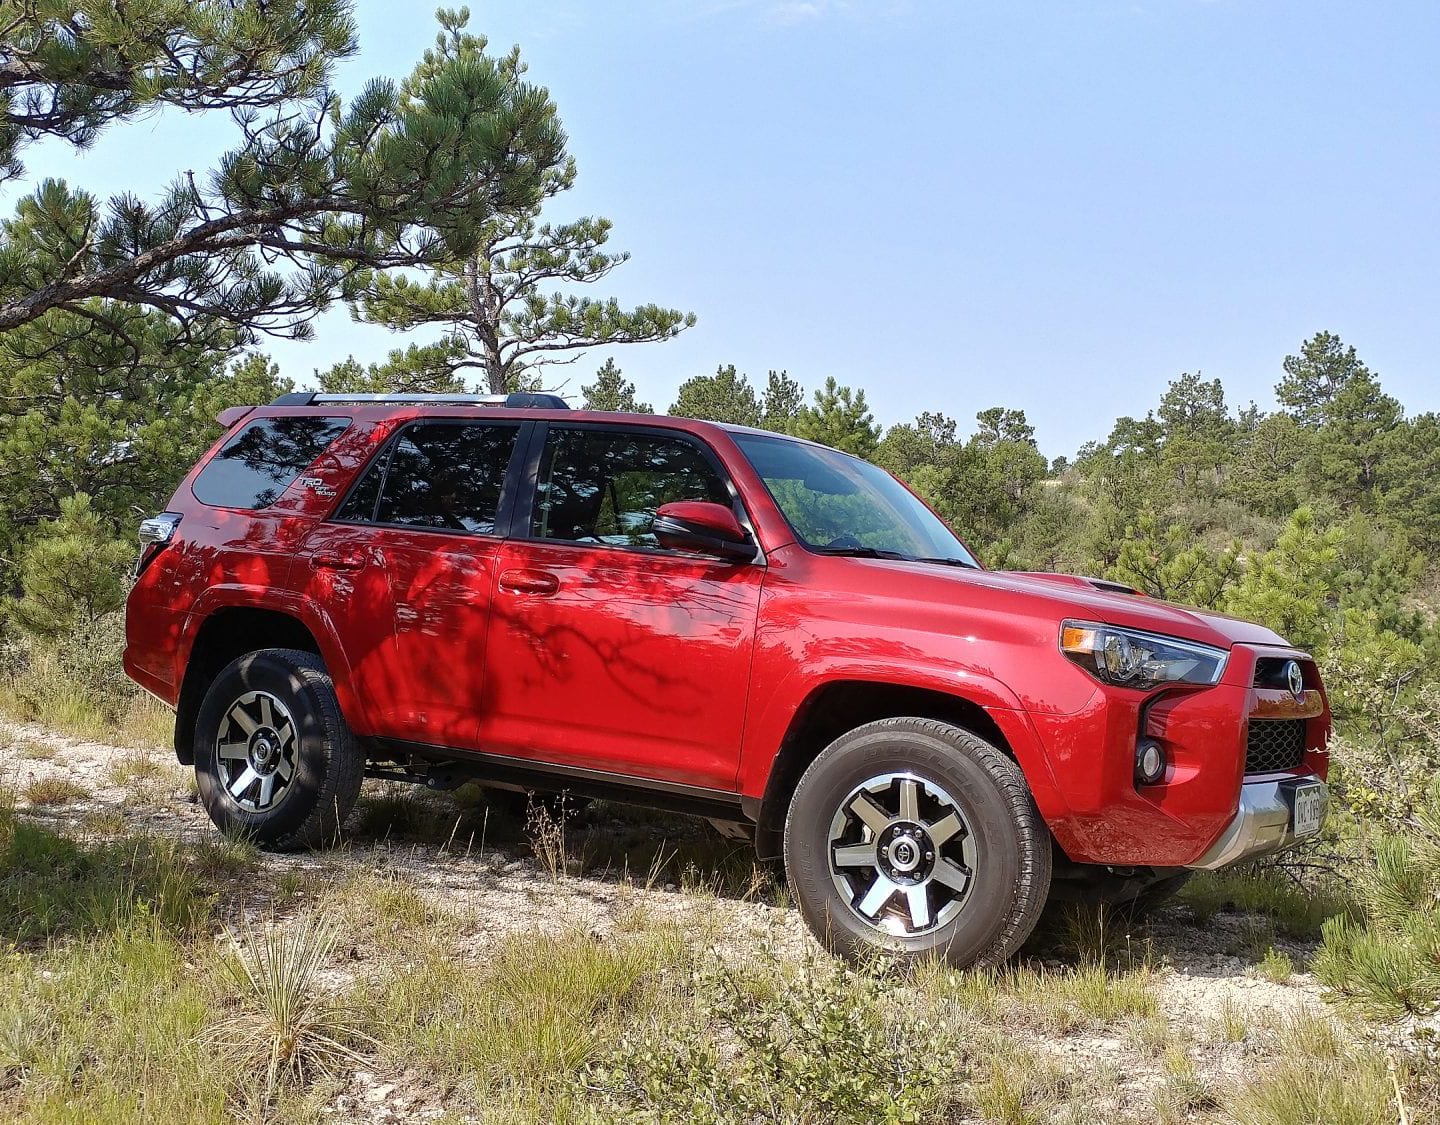 2018 Toyota 4Runner TRD Off Road Makes Sense of This SUV